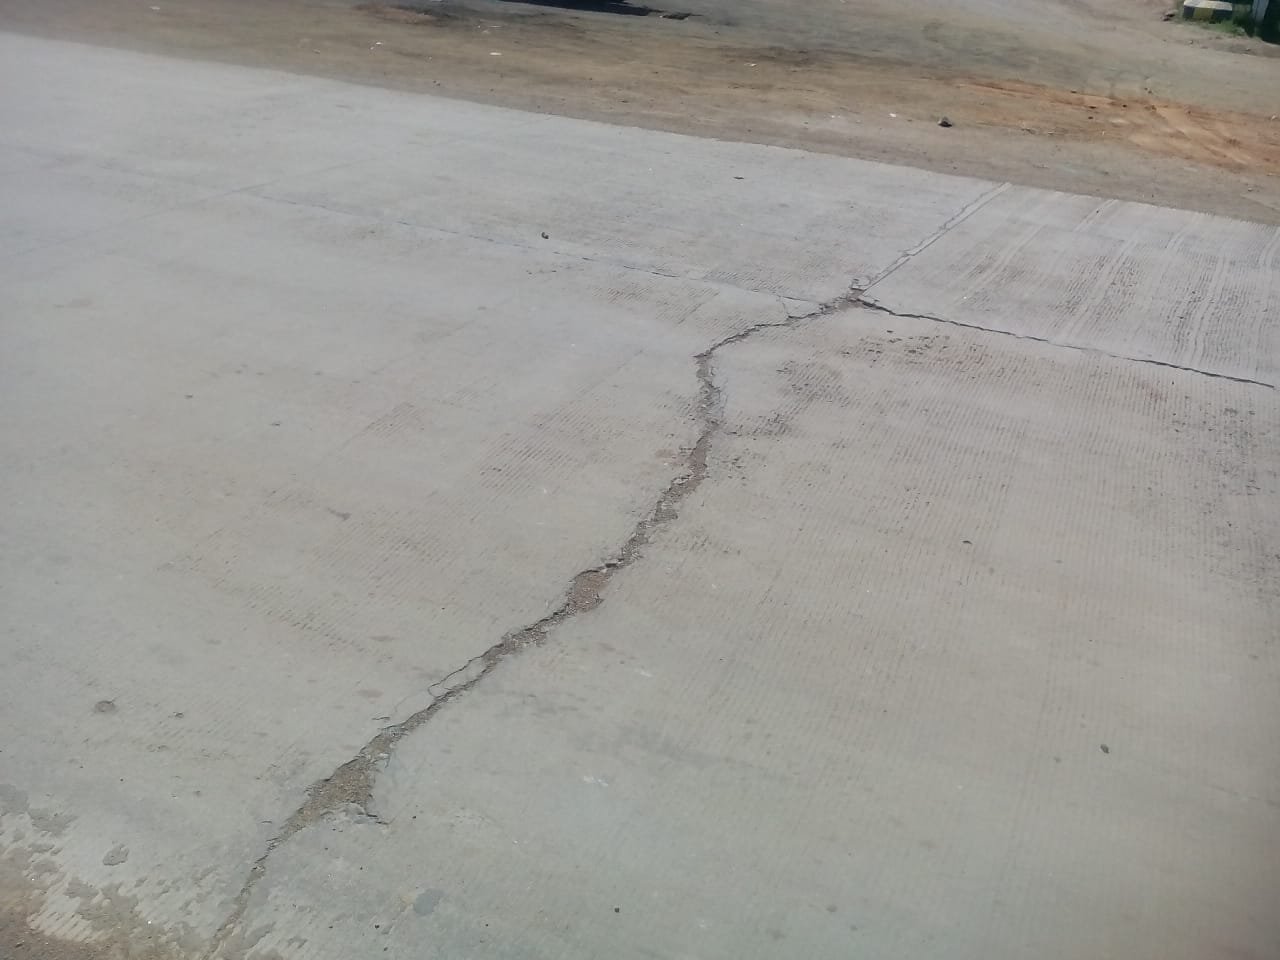 68 crores CC road started splitting into pieces